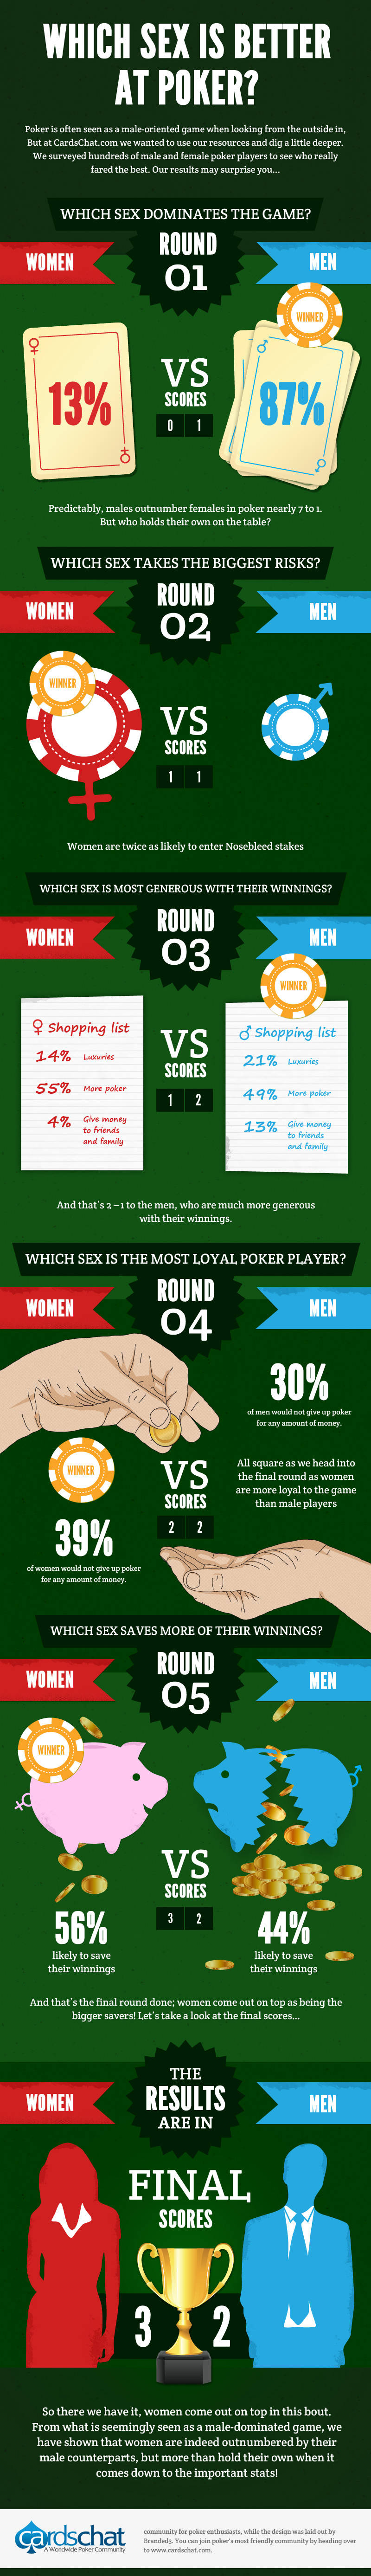 Poker Stats: Battle of the Sexes